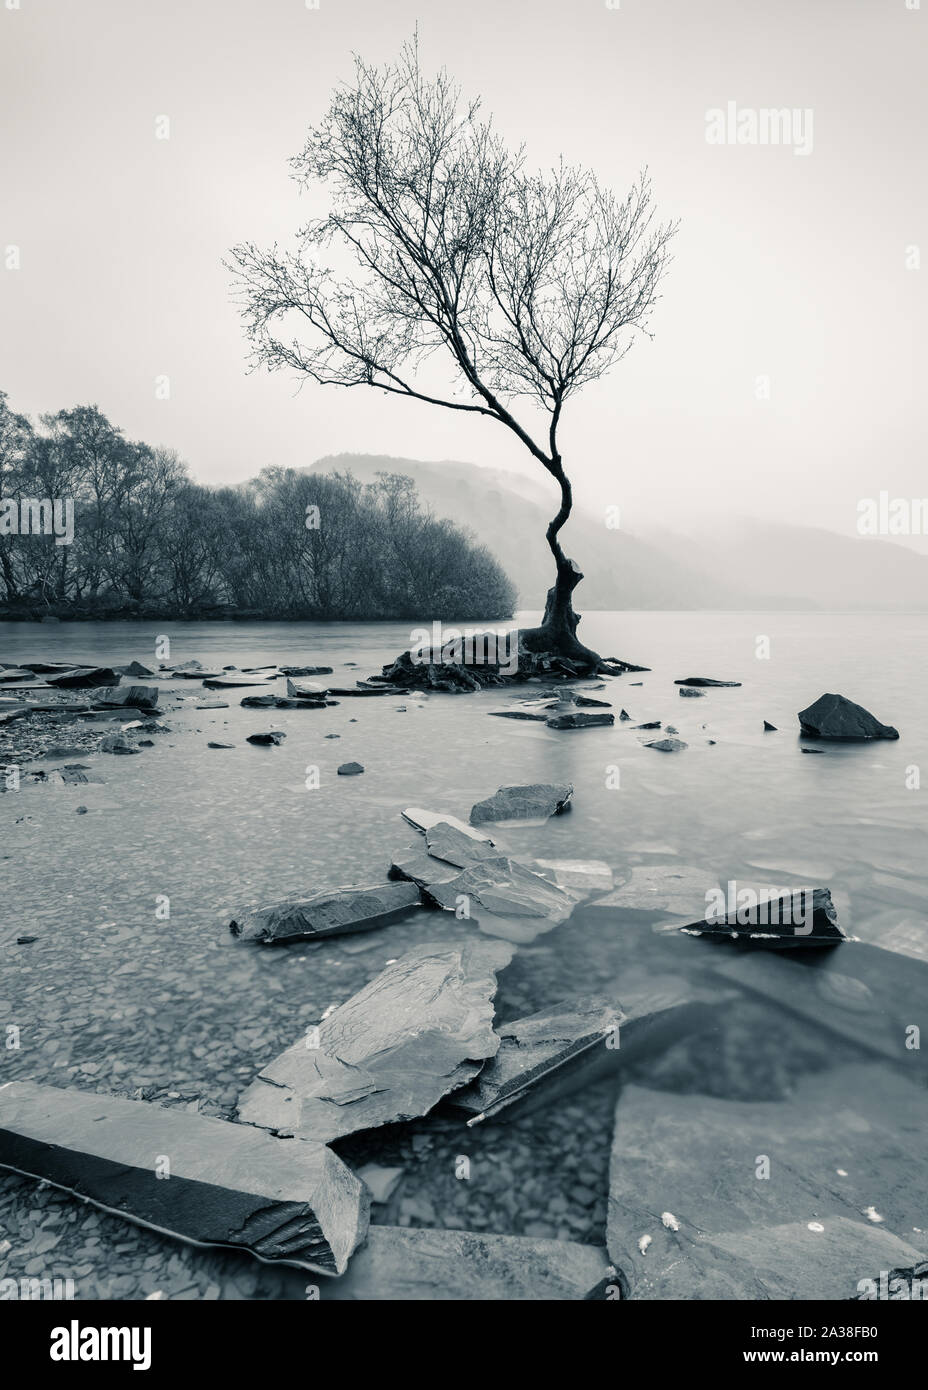 A lone tree stands on a tiny island surrounded by slate at the edge of Llyn Padarn, Llanberis, on a rainy spring afternoon. Stock Photo